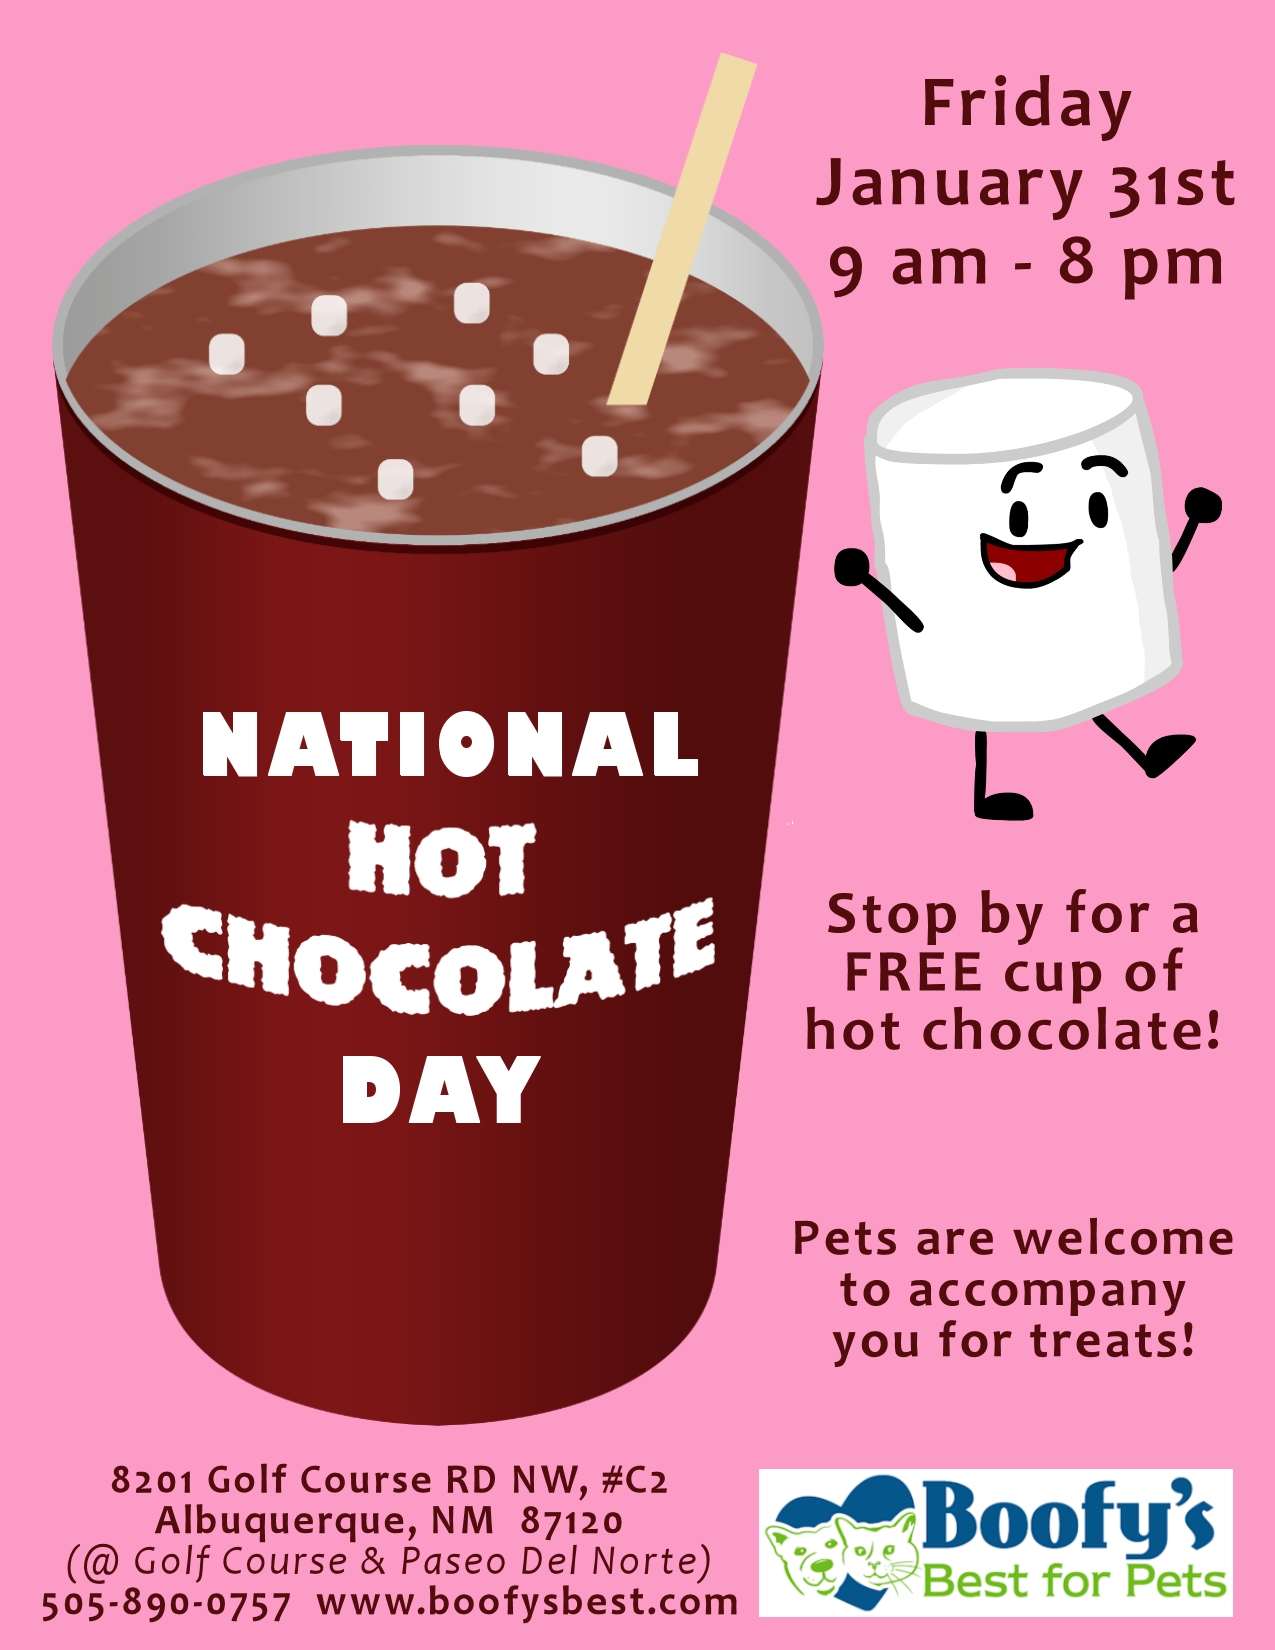 National Hot Chocolate Day At Boofy's Boofy's Best For Pets